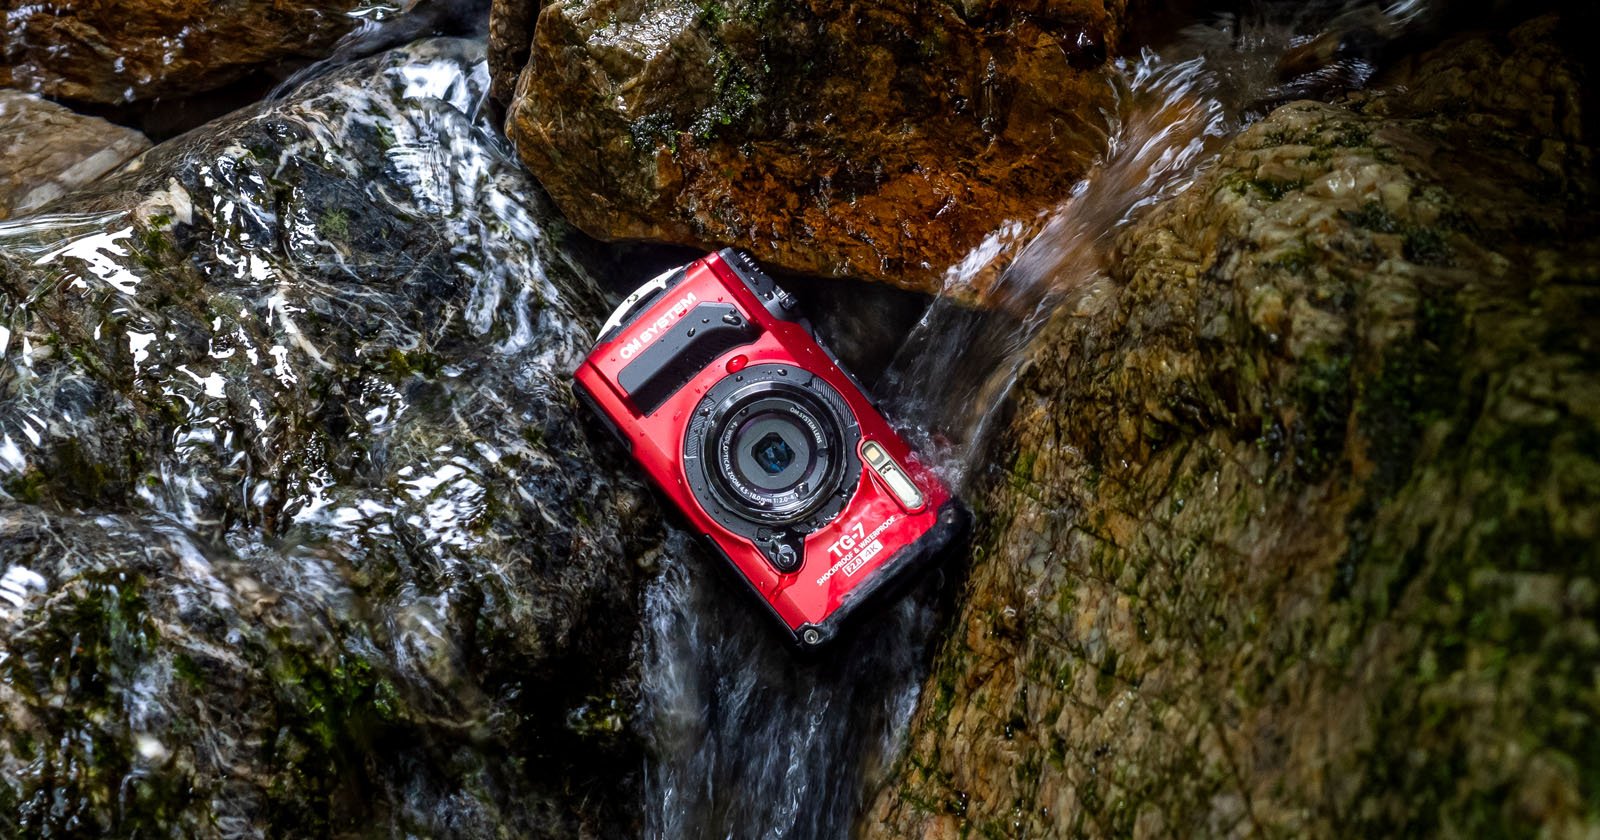 OM Systems Tough TG-7 is a Rugged Companion for Outdoor Photographers